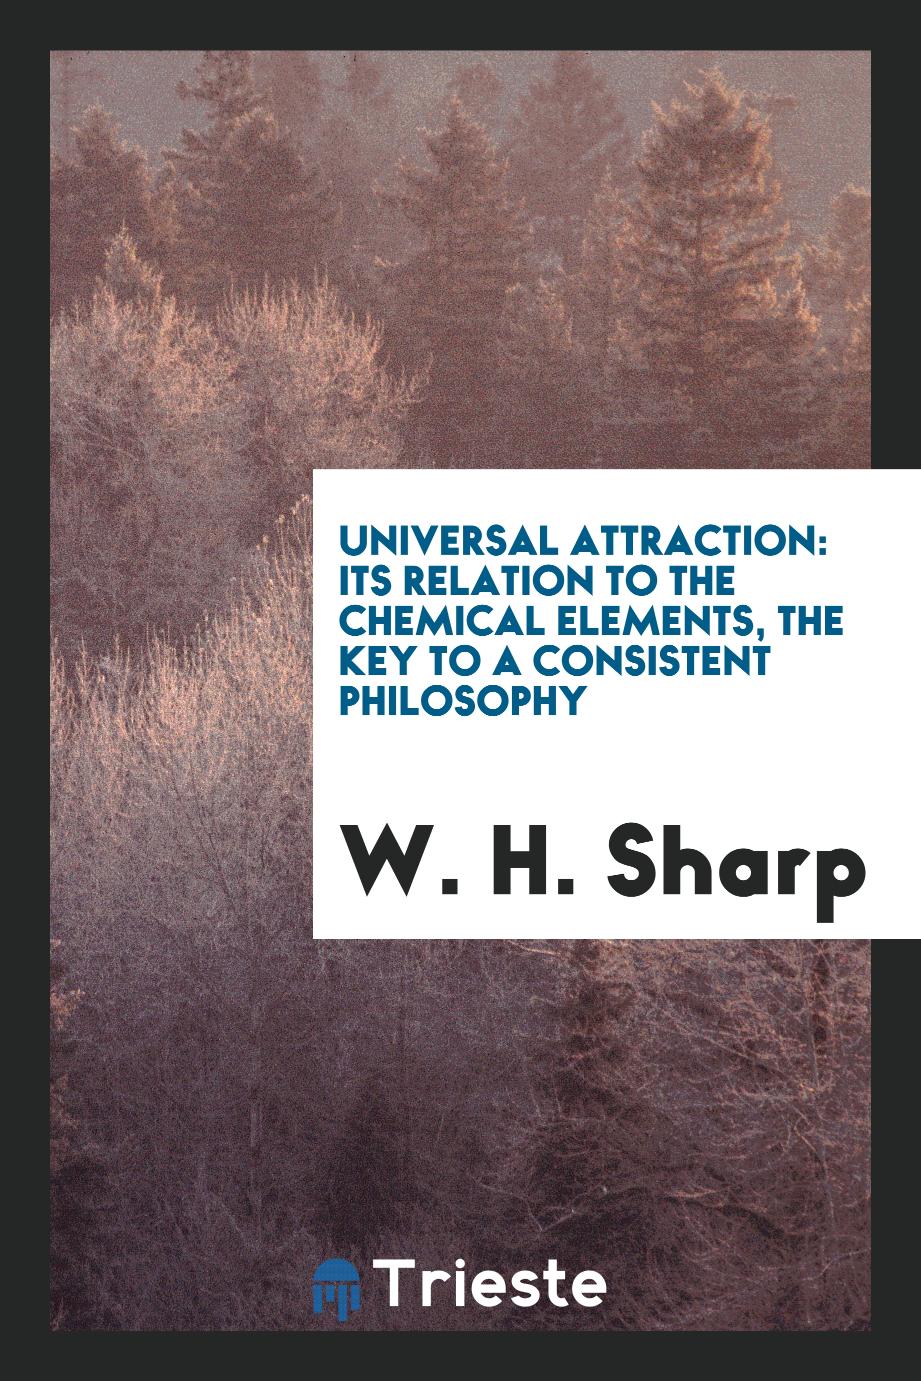 Universal attraction: its relation to the chemical elements, the key to a consistent philosophy